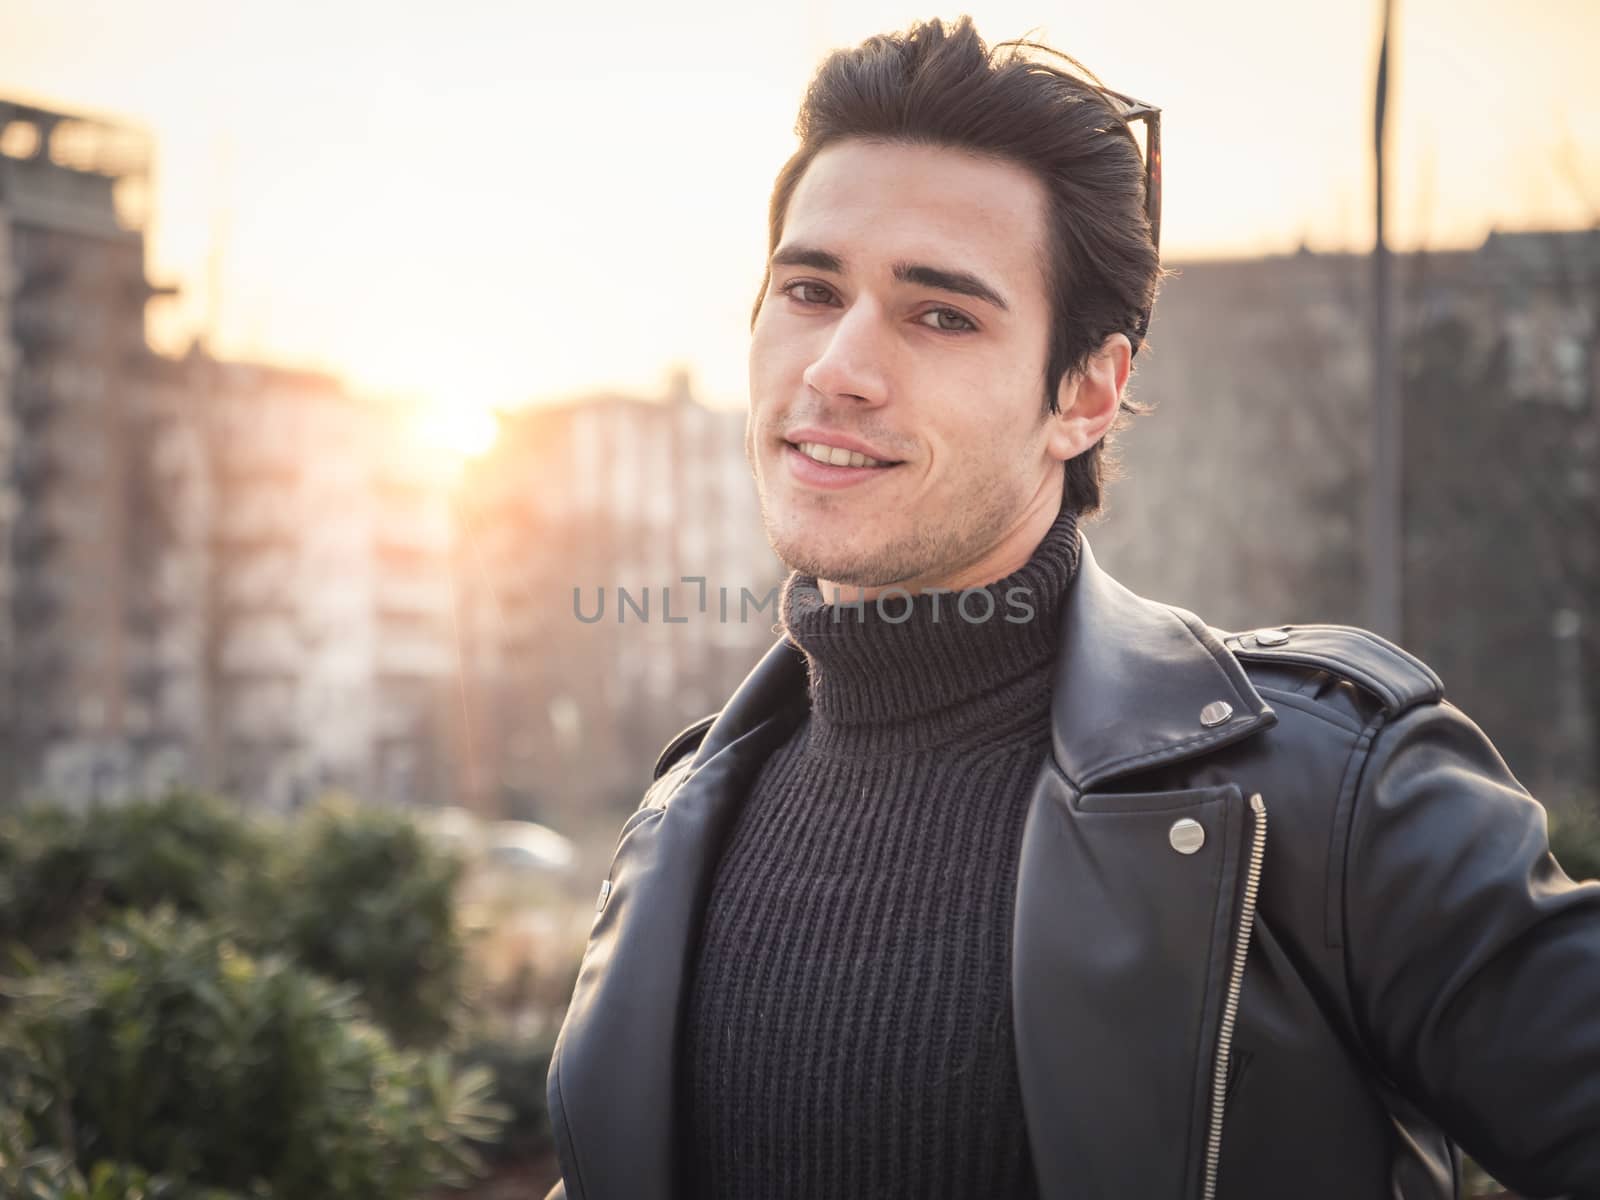 One handsome young man in modern city setting by artofphoto